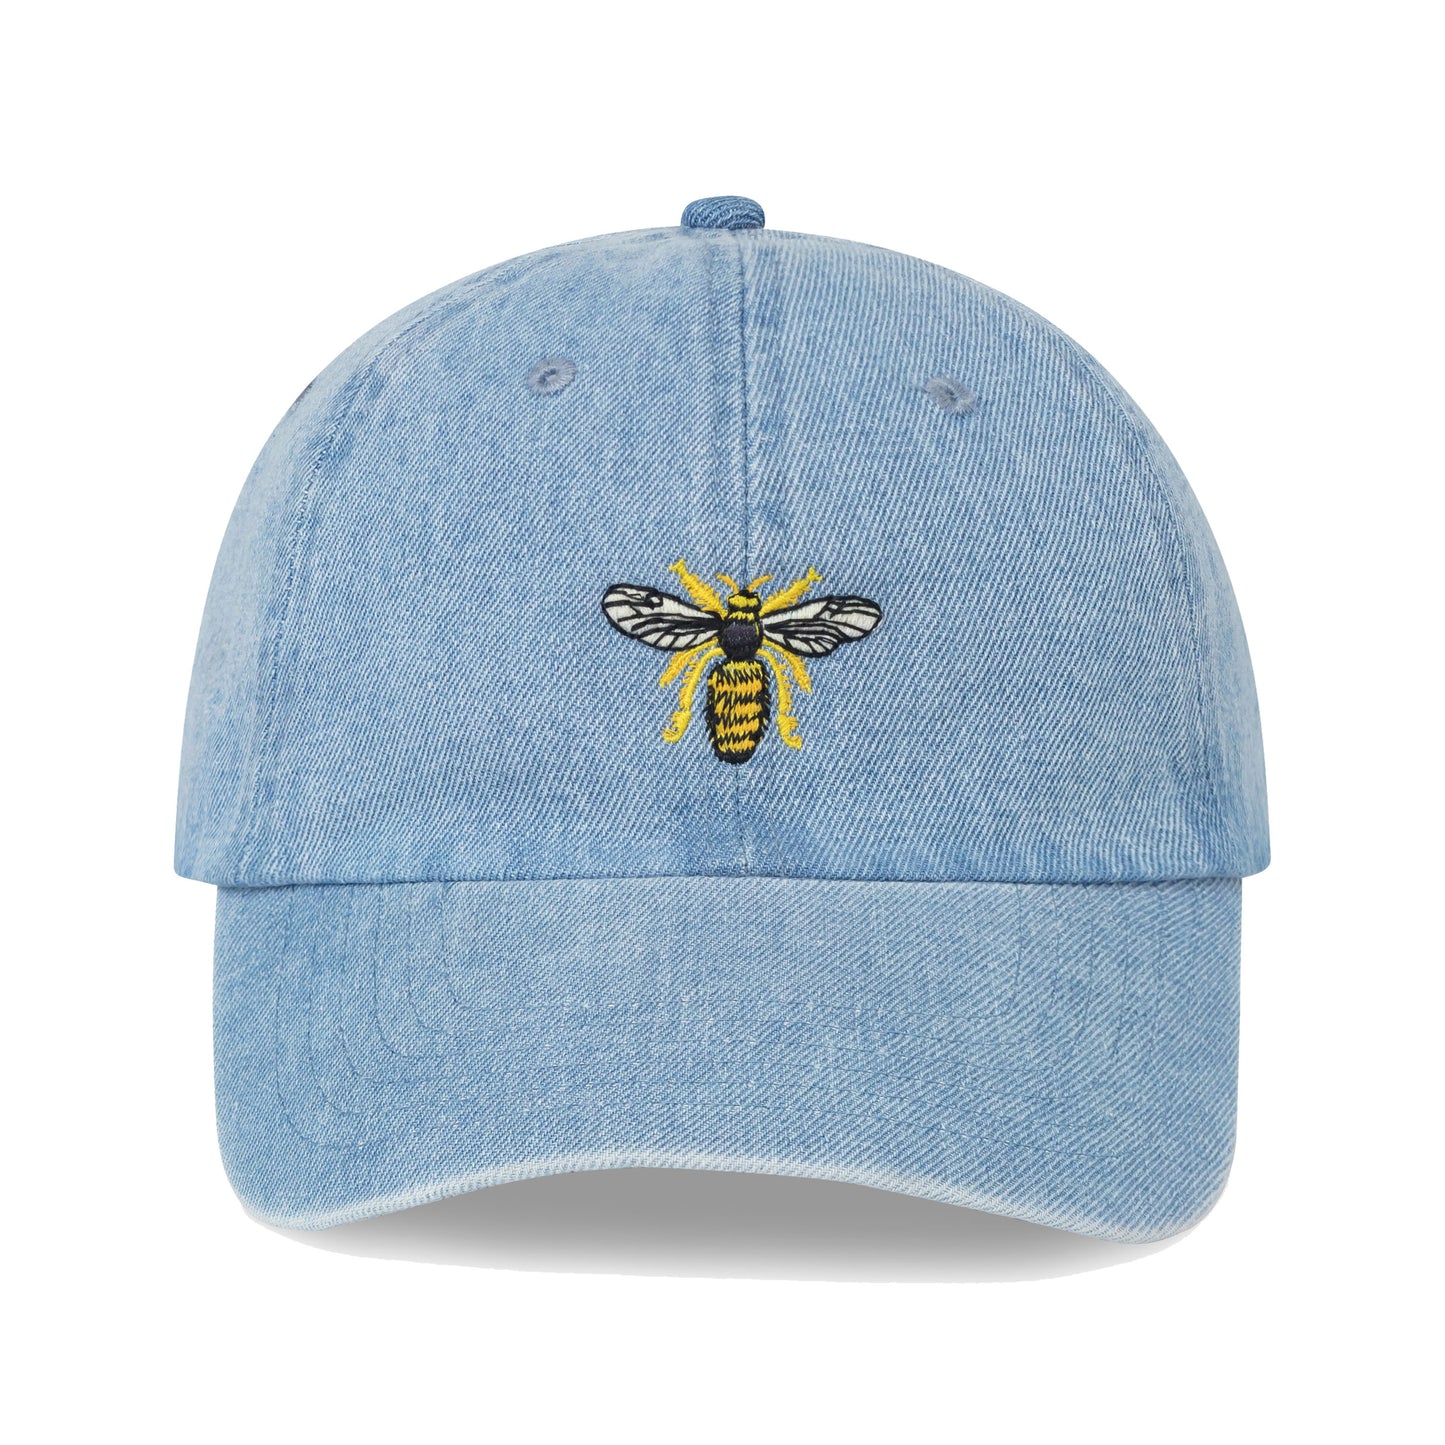 Light blue denim hat with satin-stitched drone bee motif.